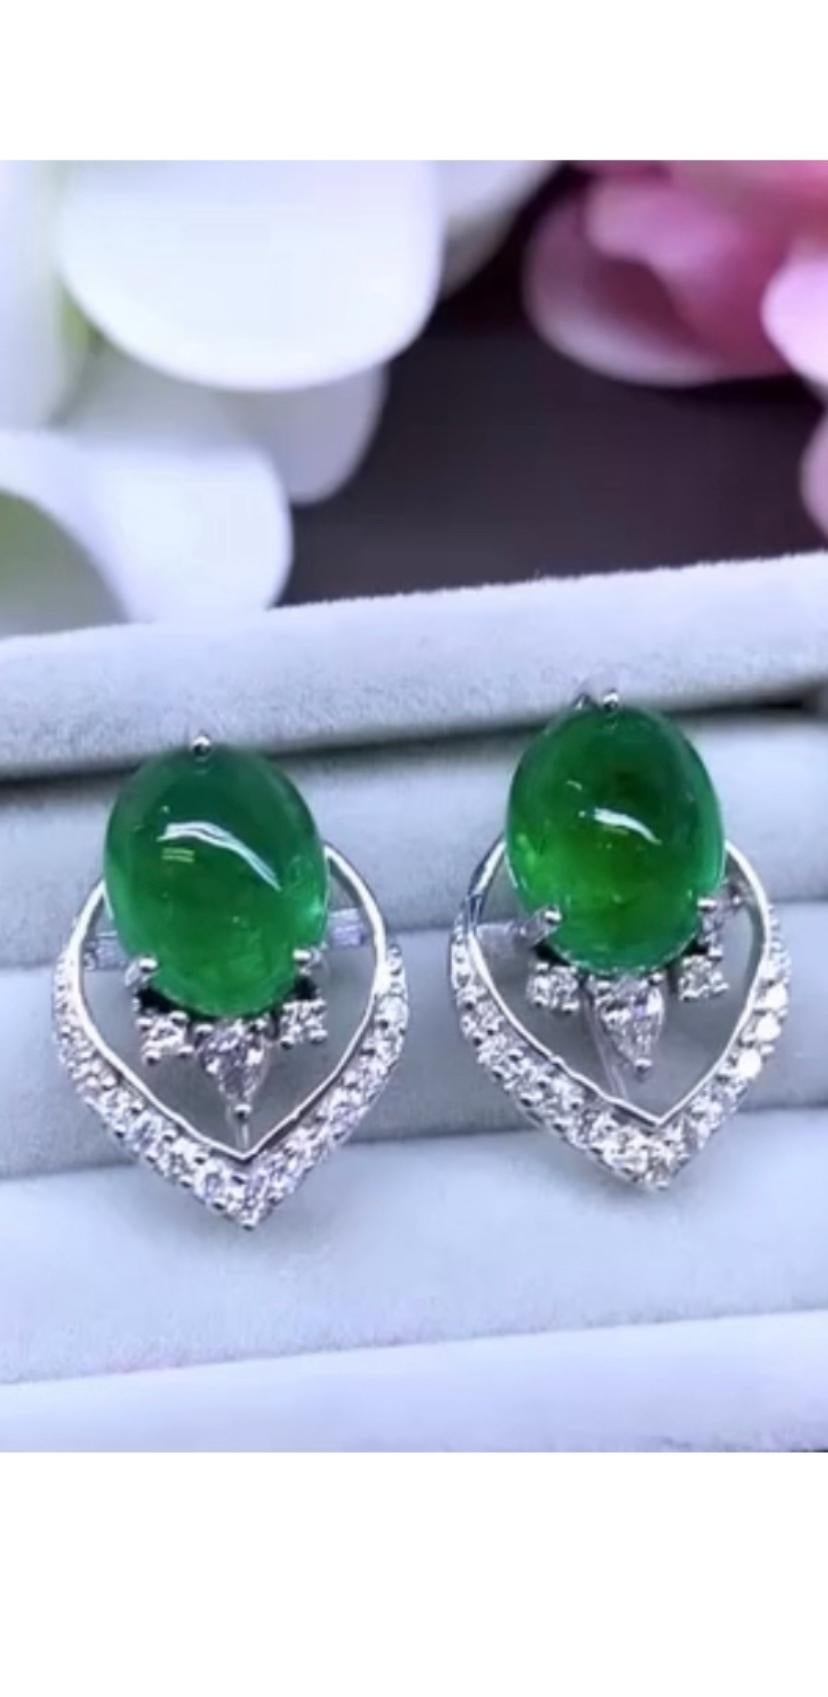 An exclusive earrings in contemporary style , so modern and glamour design, ideal outfit for all days, by Italian designer.
Earrings come in 18k gold with 2 pieces of natural Zambian Emeralds in perfect oval cabochon cut, fine quality, of 8,86